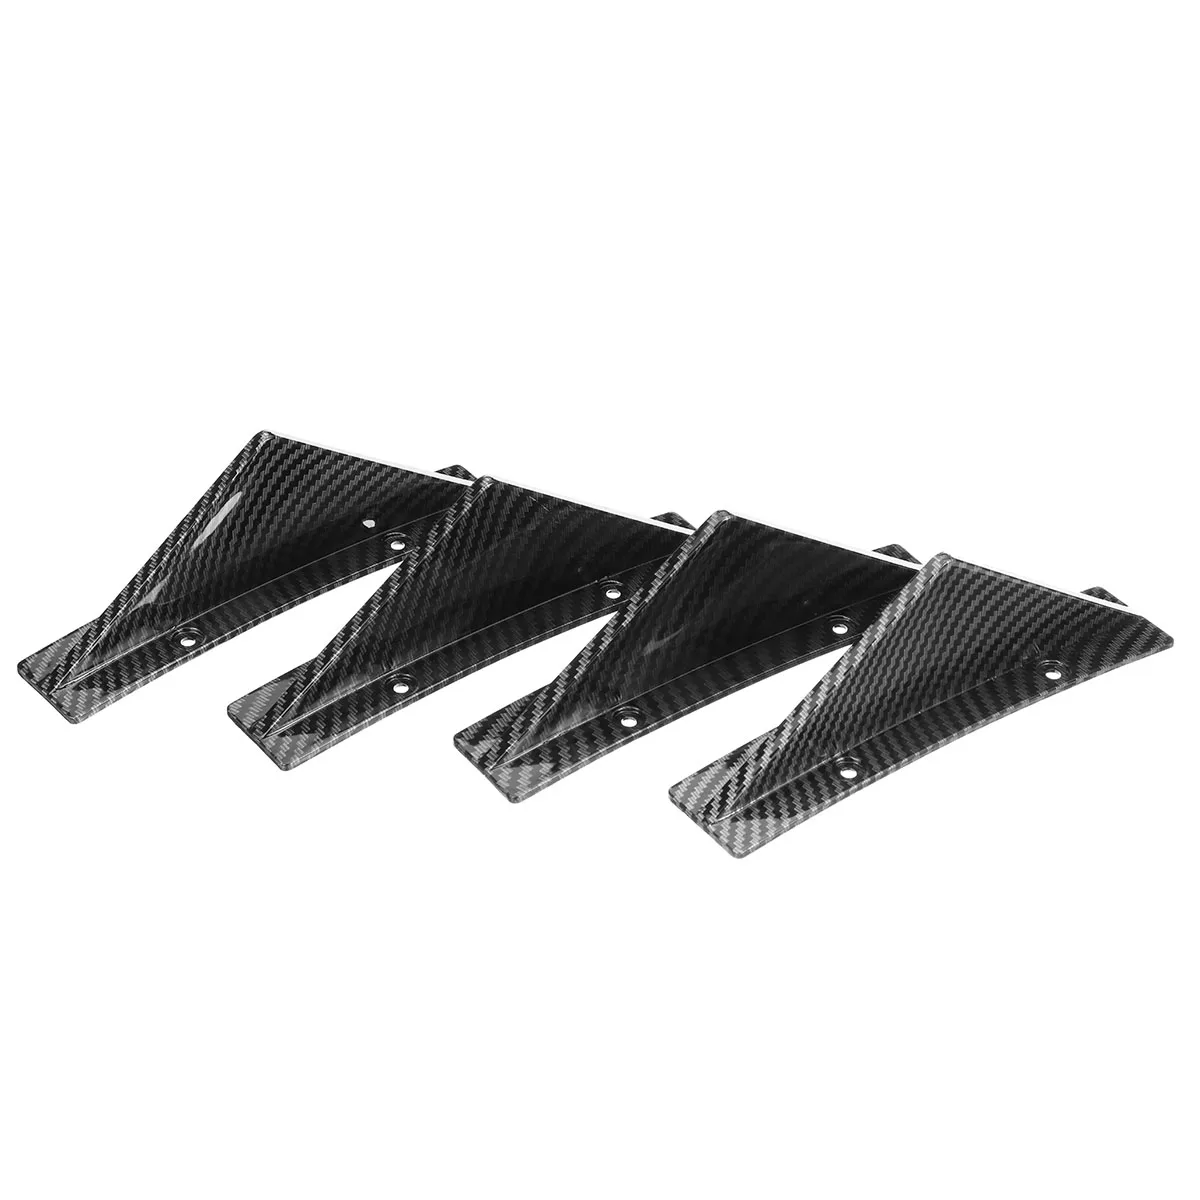 4PCS Universal Car Rear Bumper Lip Diffuser Shark Fins For Honda For Civic For Accord For LEXUS IS200T IS250 IS350 ES300h ES330